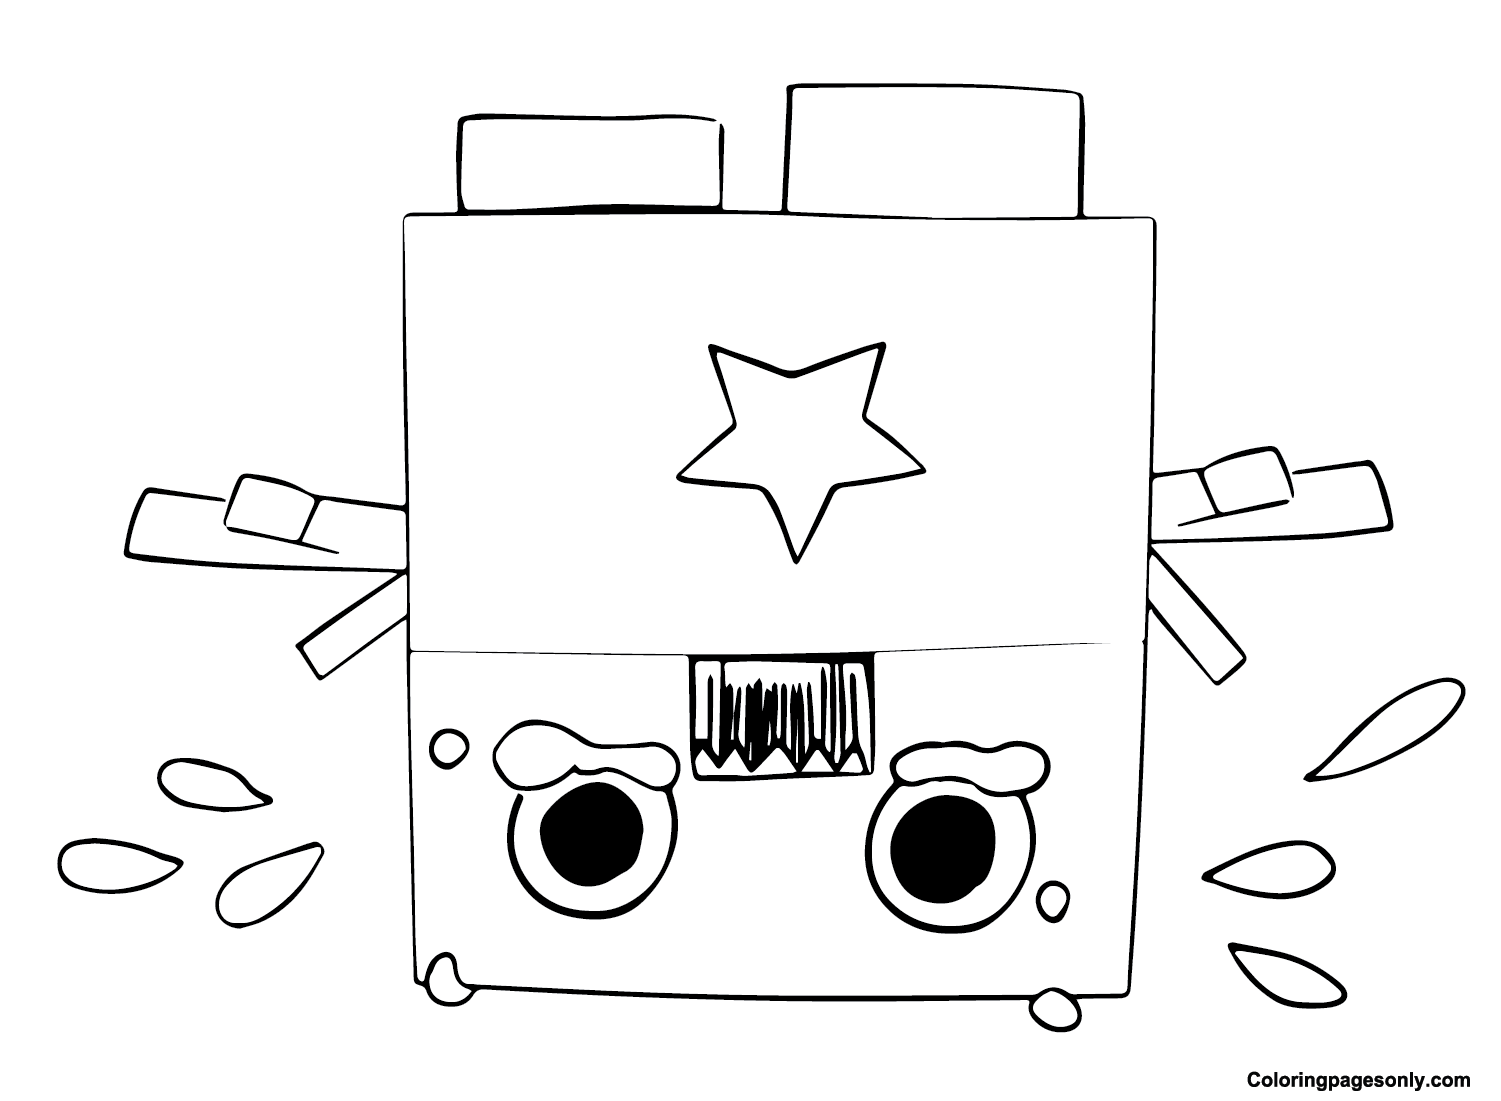 Boxy Boo Coloring Pages Coloring Pages For Kids And Adults